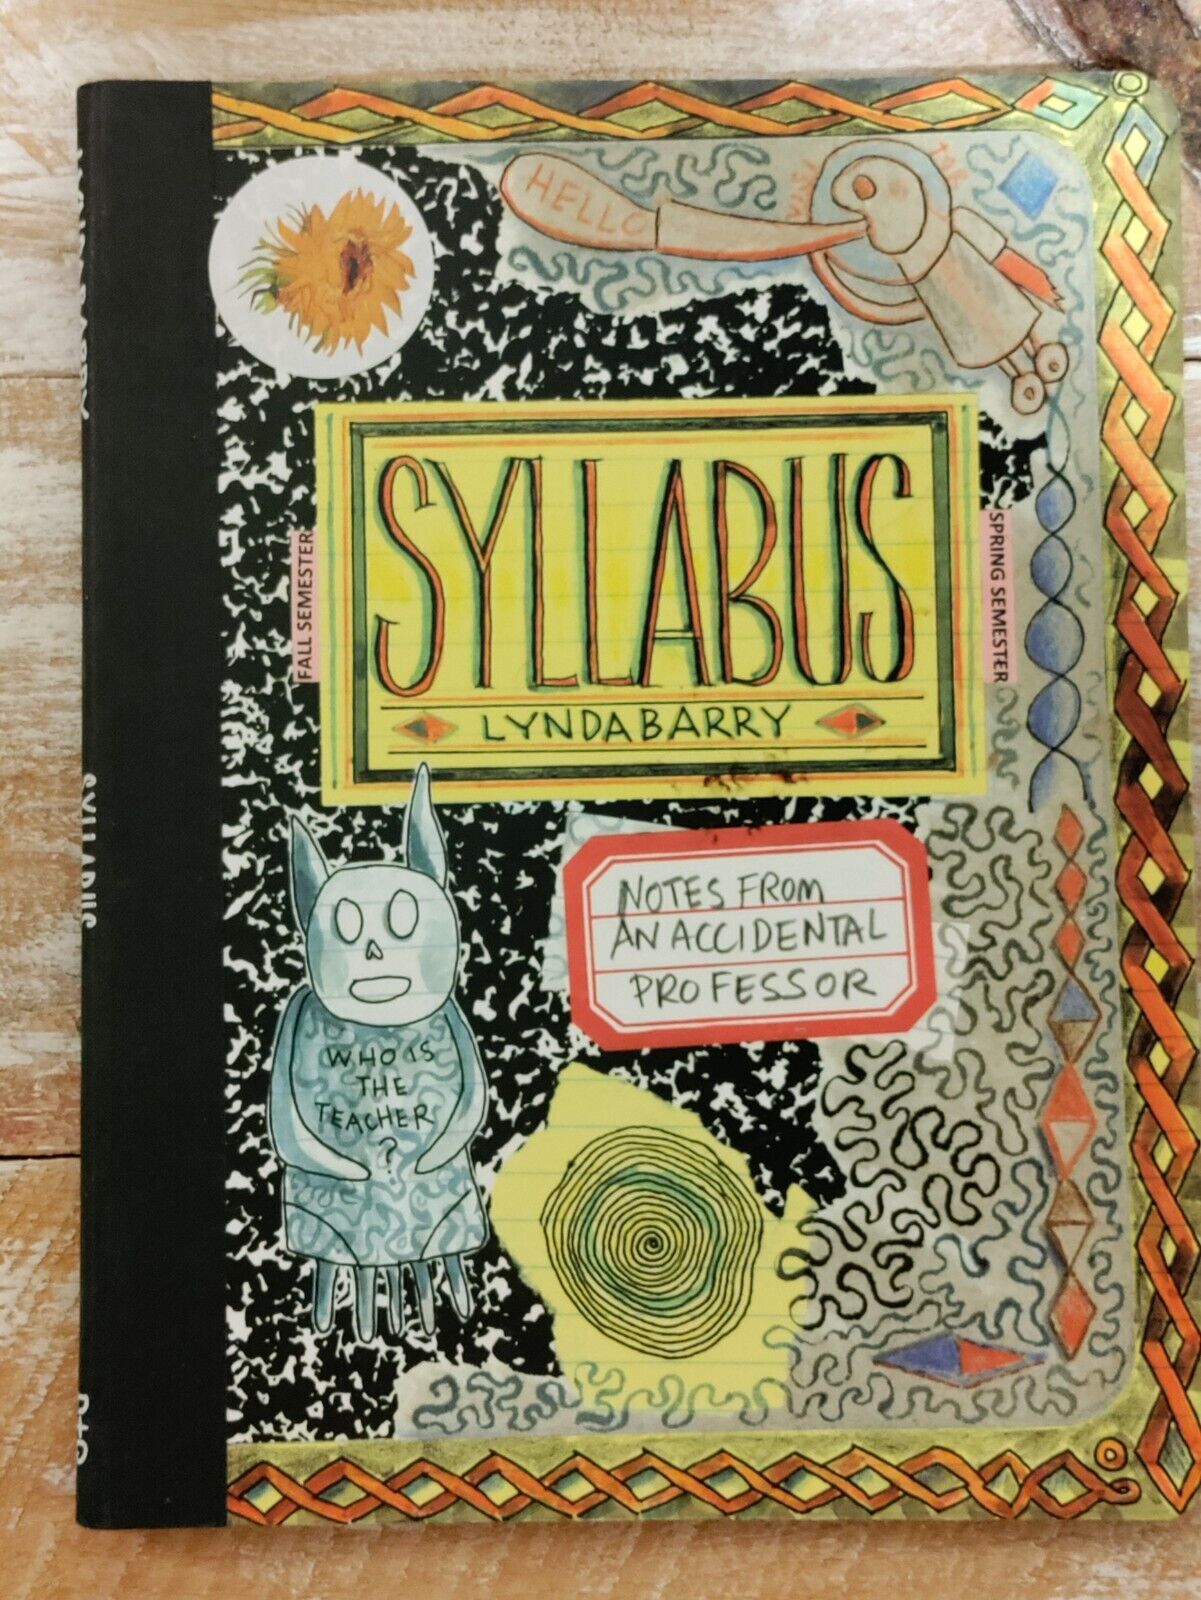 Syllabus: Notes from an Accidental Professor (Drawn & Quarterly, September 2014)